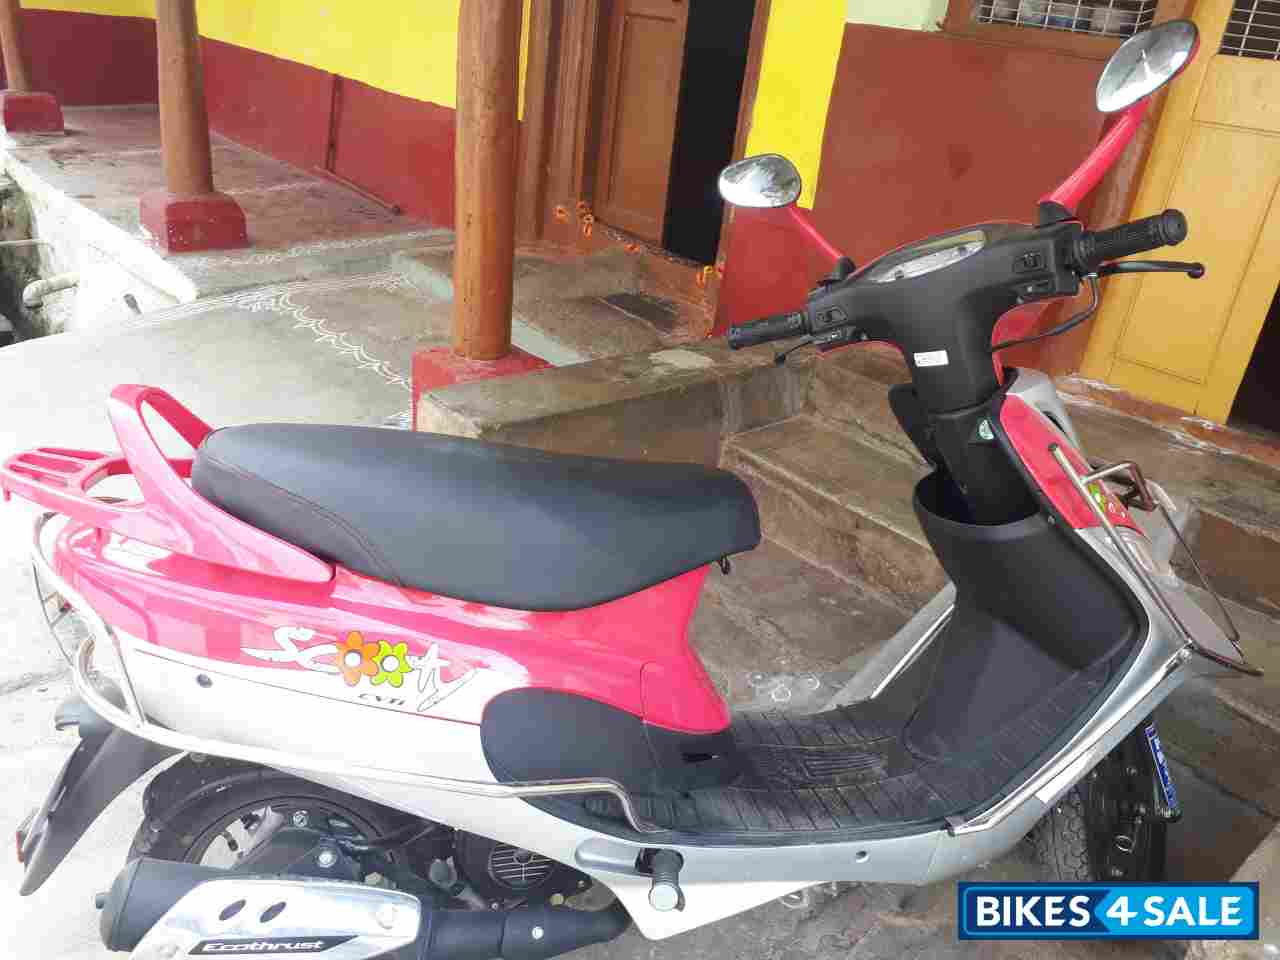 buy second hand scooty online